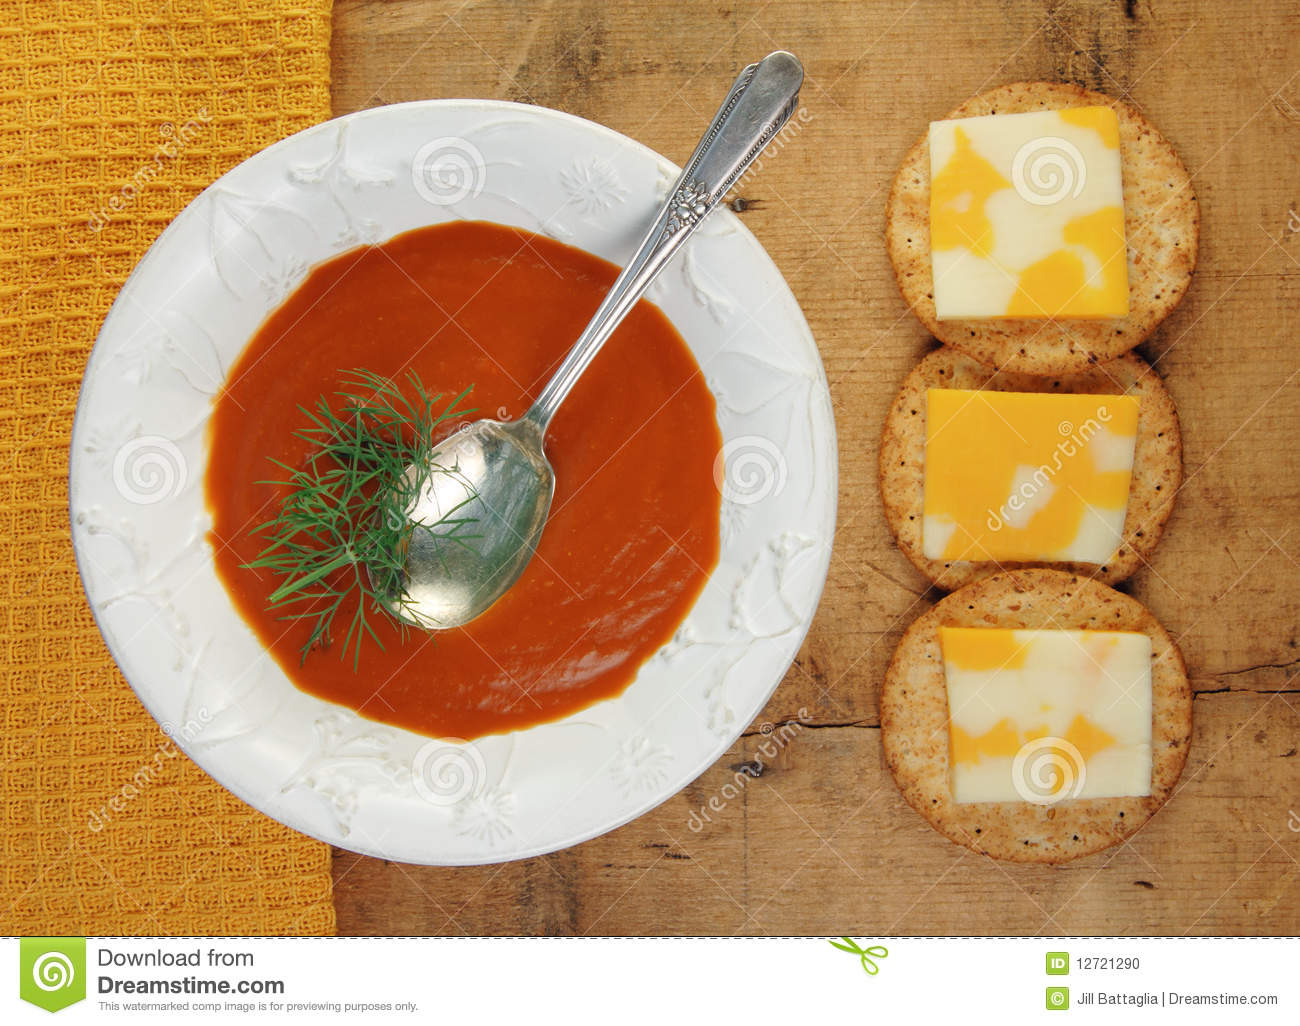 Homemade Tomato Soup With Crackers And Cheese On A Rustic Wooden Table